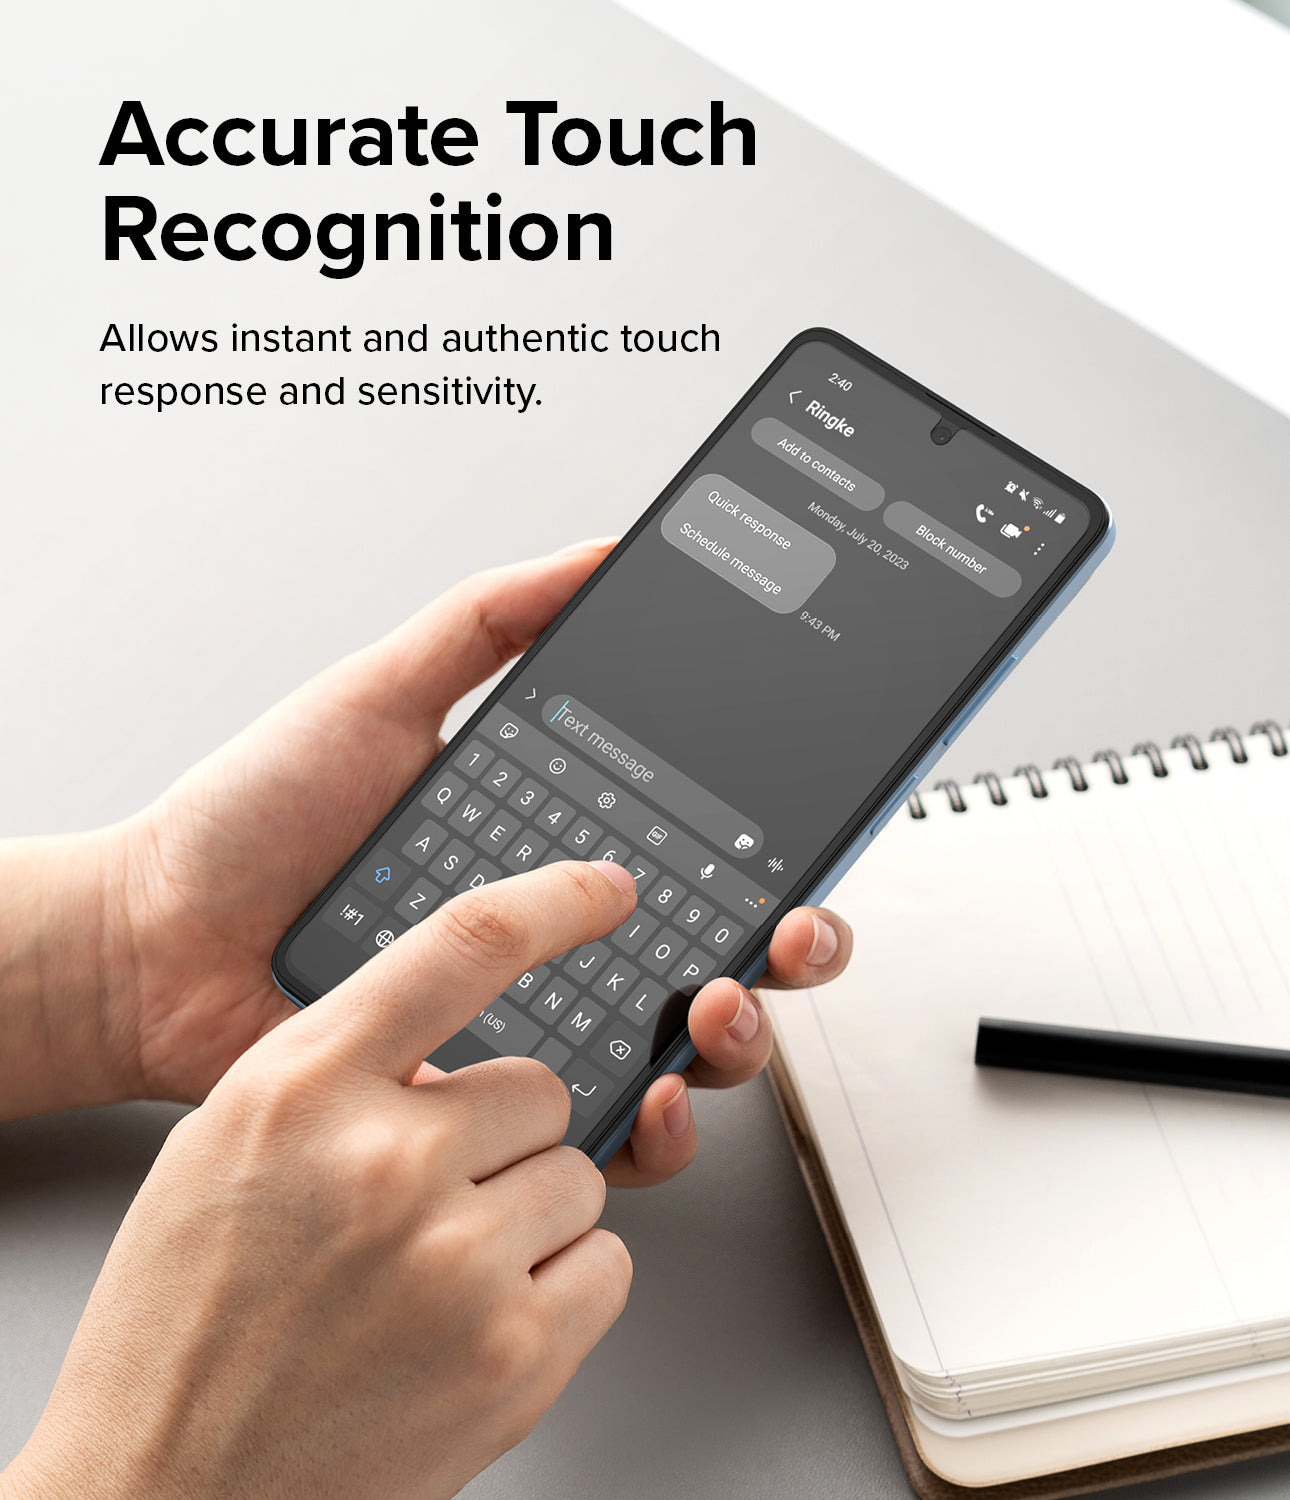 Allows instant and authentic touch response and sensitivity